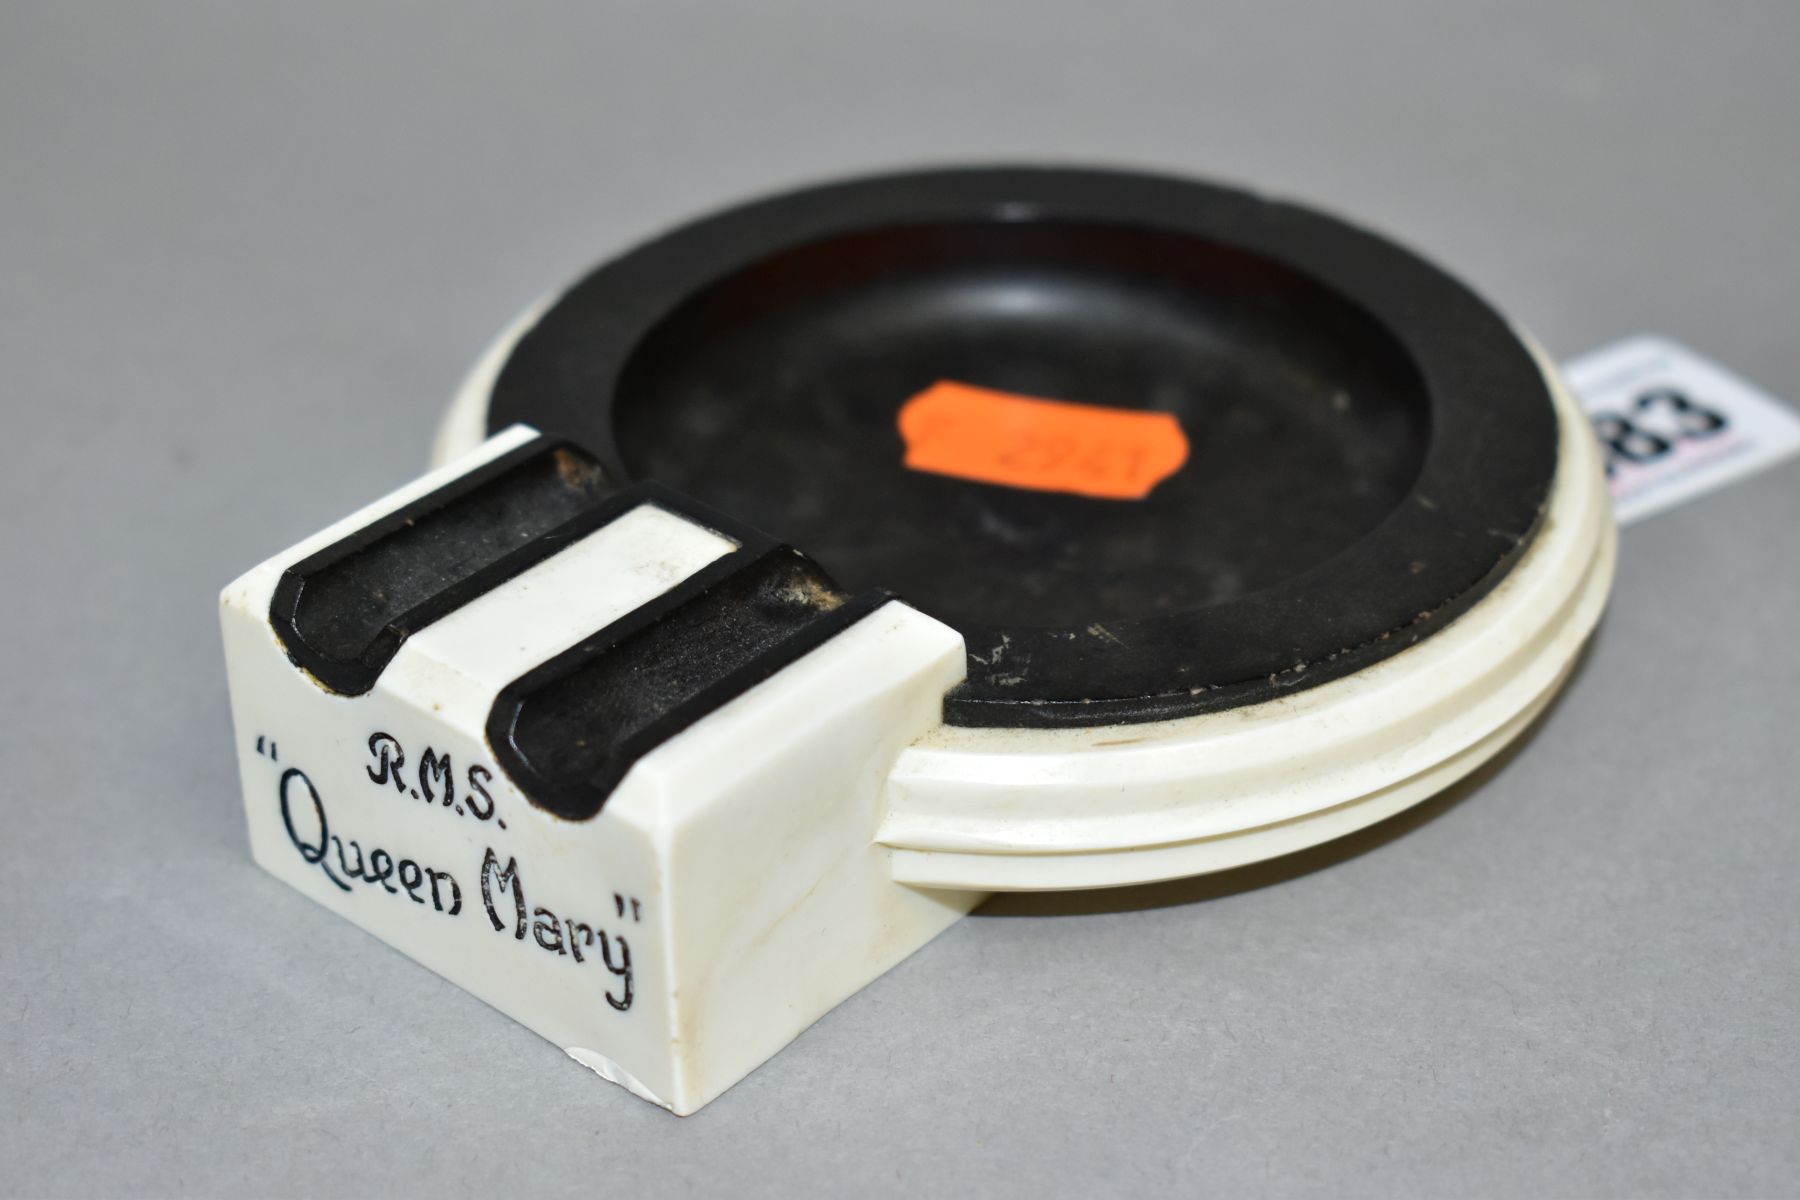 AN ART DECO BAKELITE RMS QUEEN MARY ASHTRAY, in cream and black, with RMS Queen Mary marked on one - Image 2 of 5